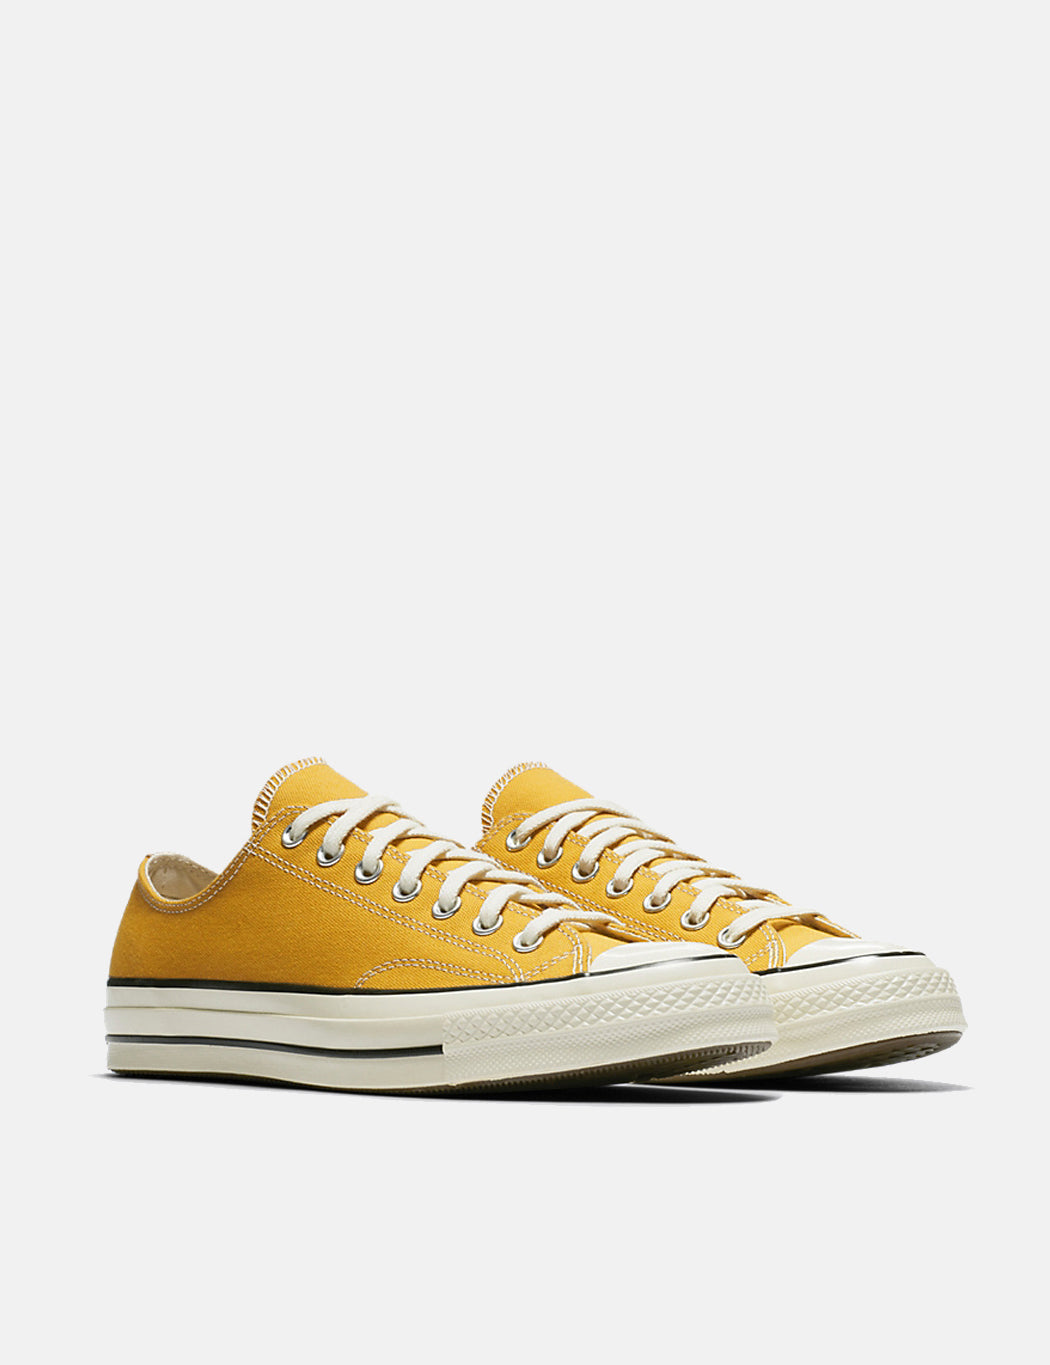 converse yellow low